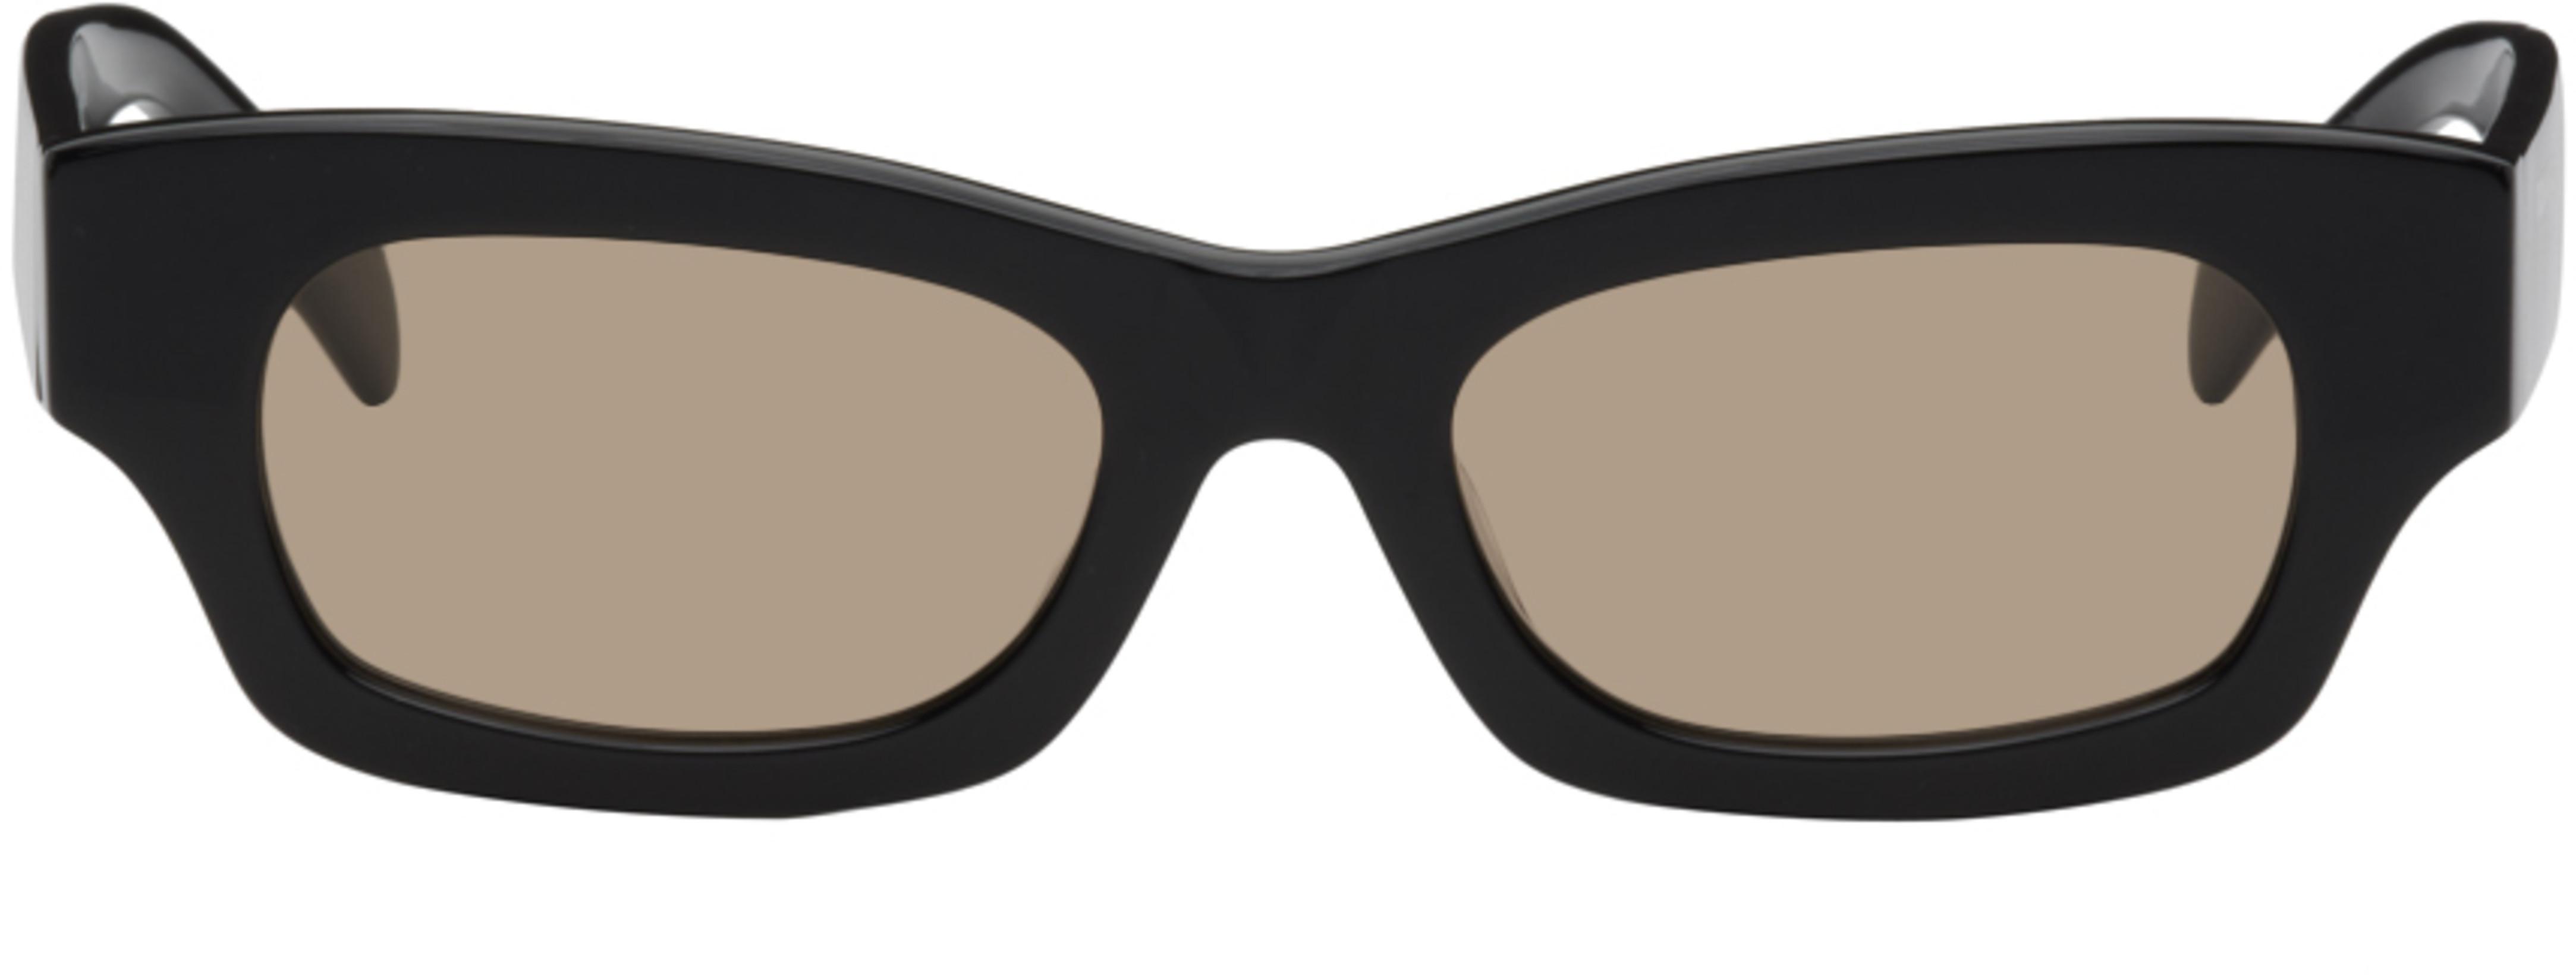 Black Tomboy Sunglasses by BONNIE CLYDE